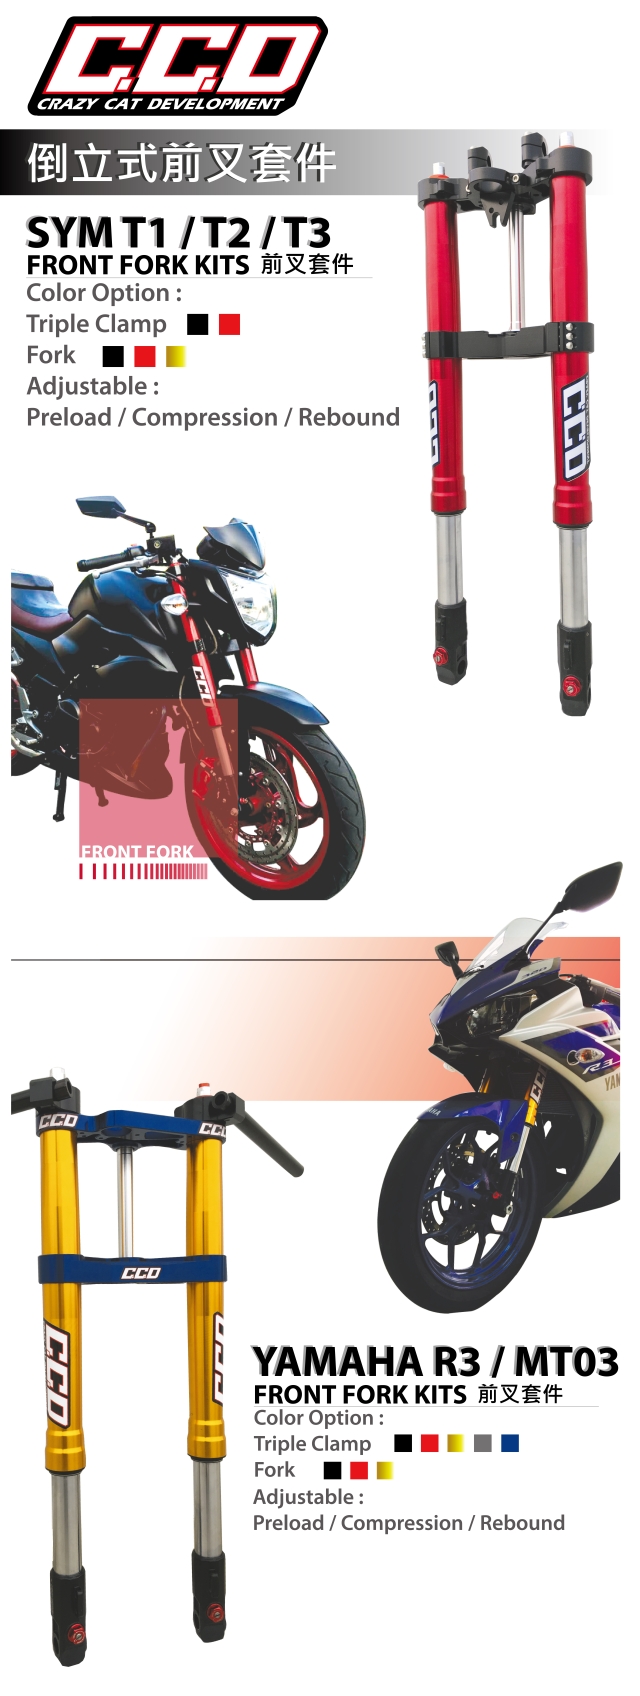 CCD TR/R3 shock absorber instruction